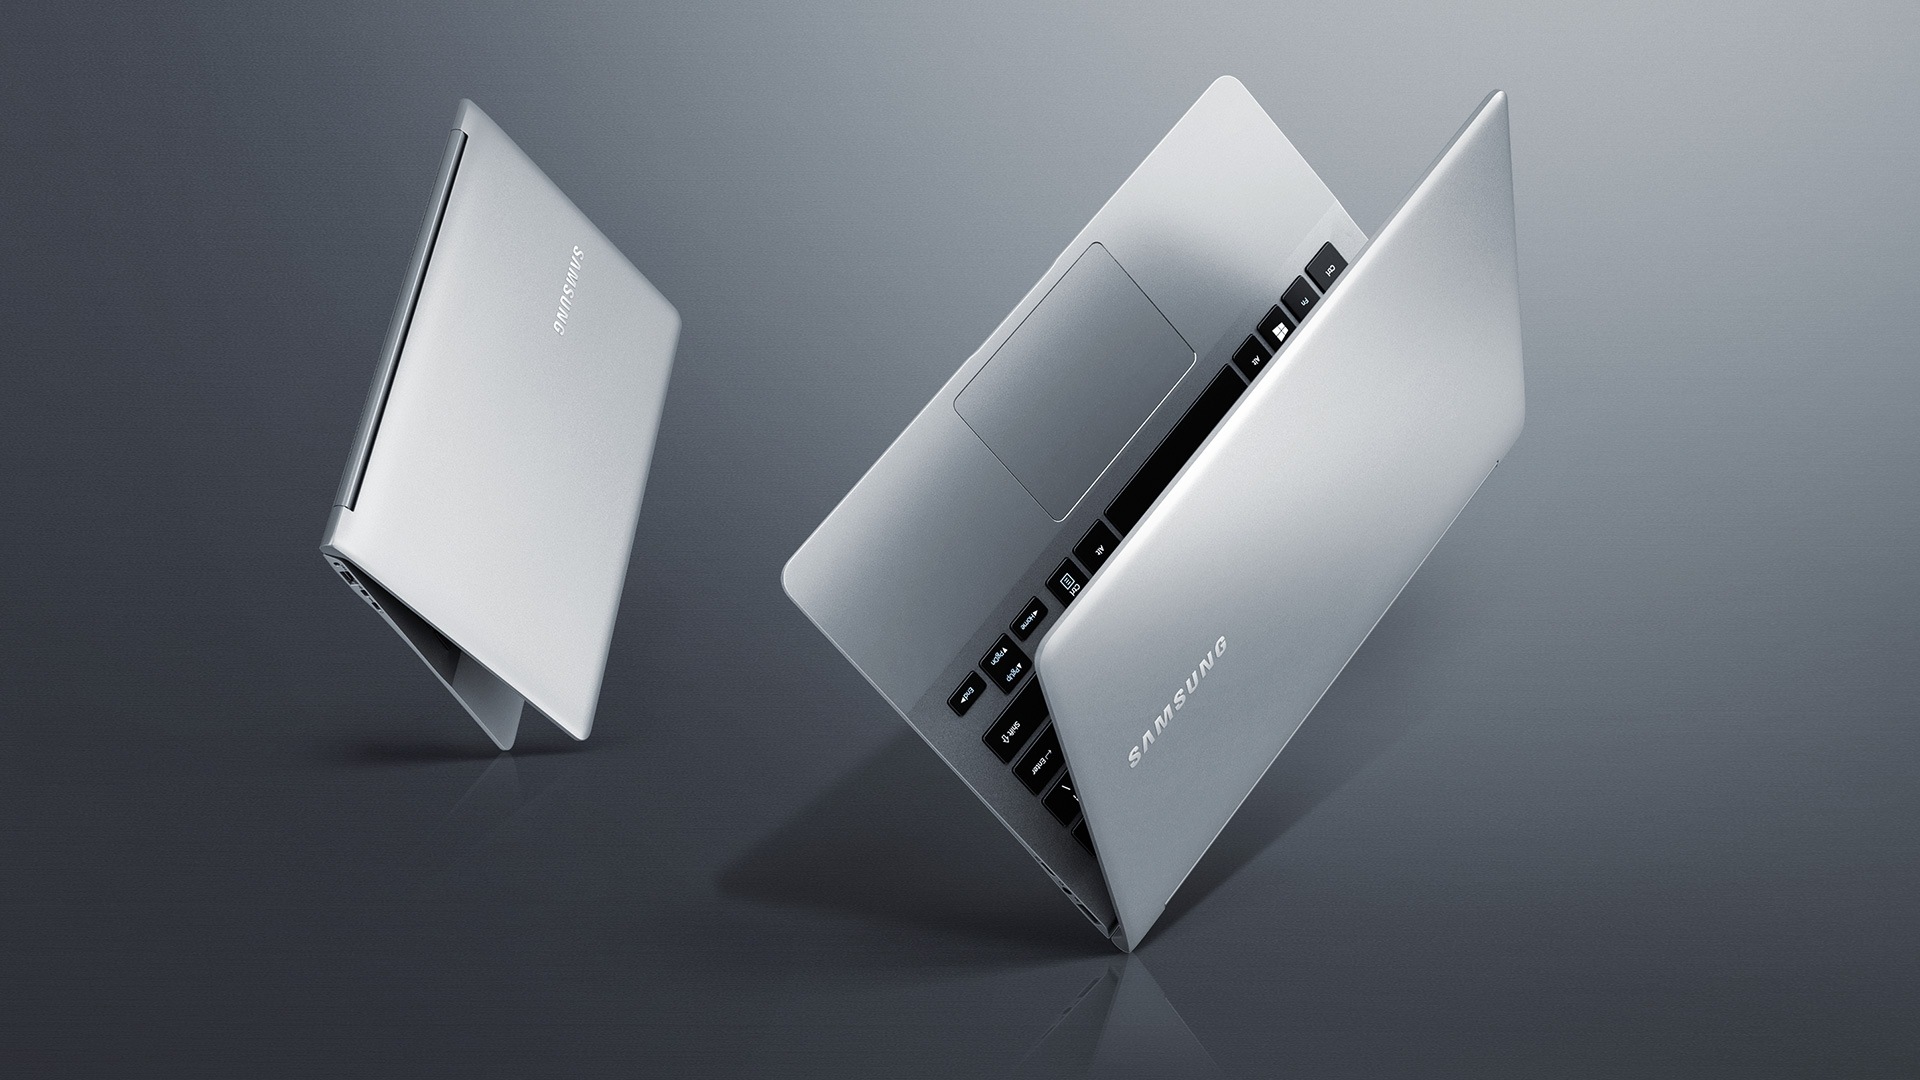 An image showing the Samsung Notebook 9.